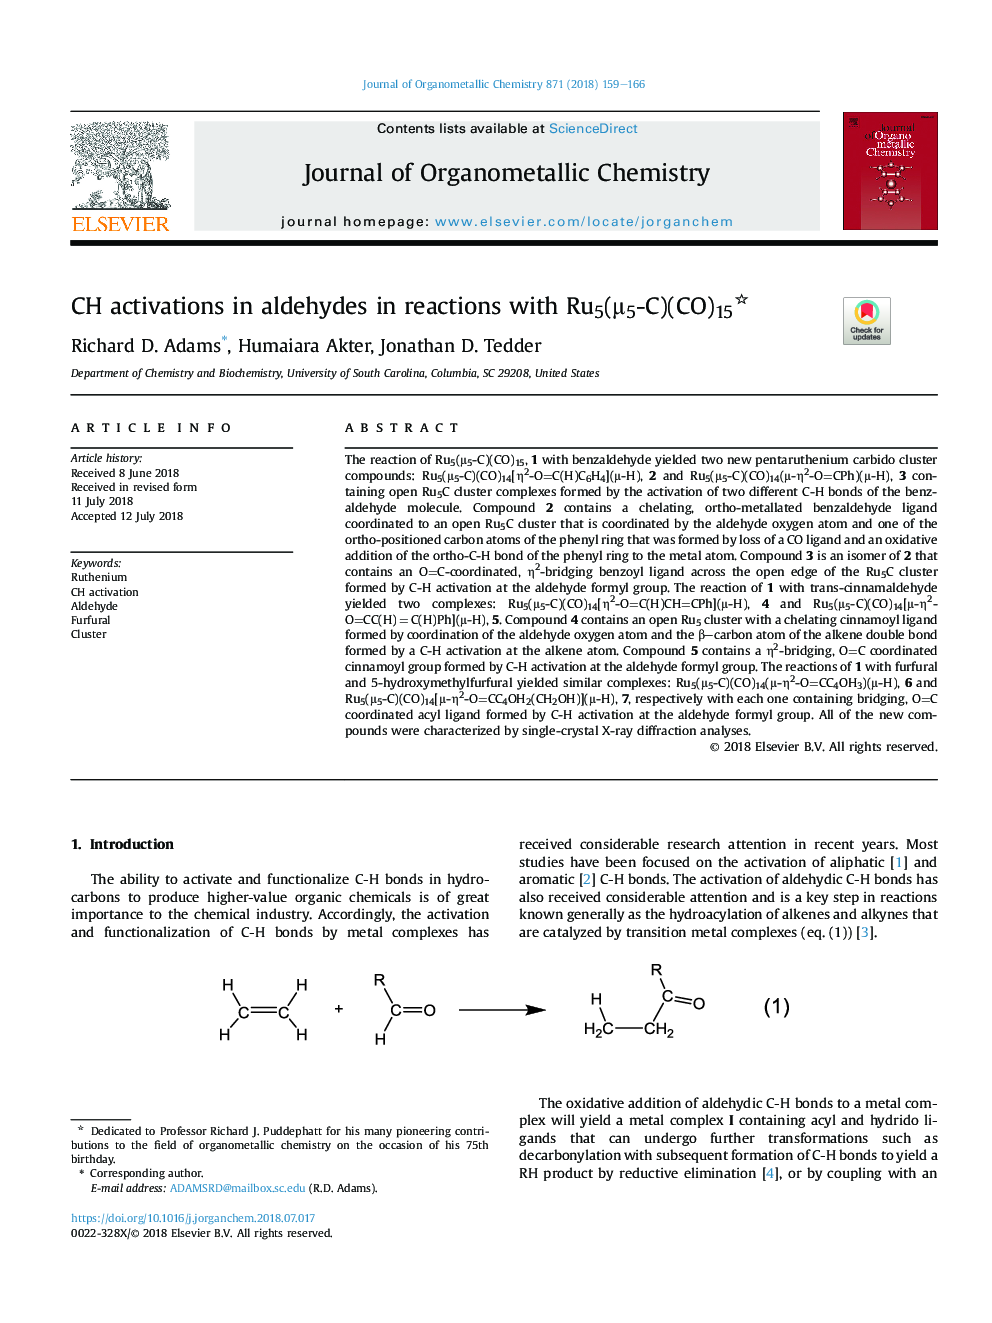 CH activations in aldehydes in reactions with Ru5(Î¼5-C)(CO)15